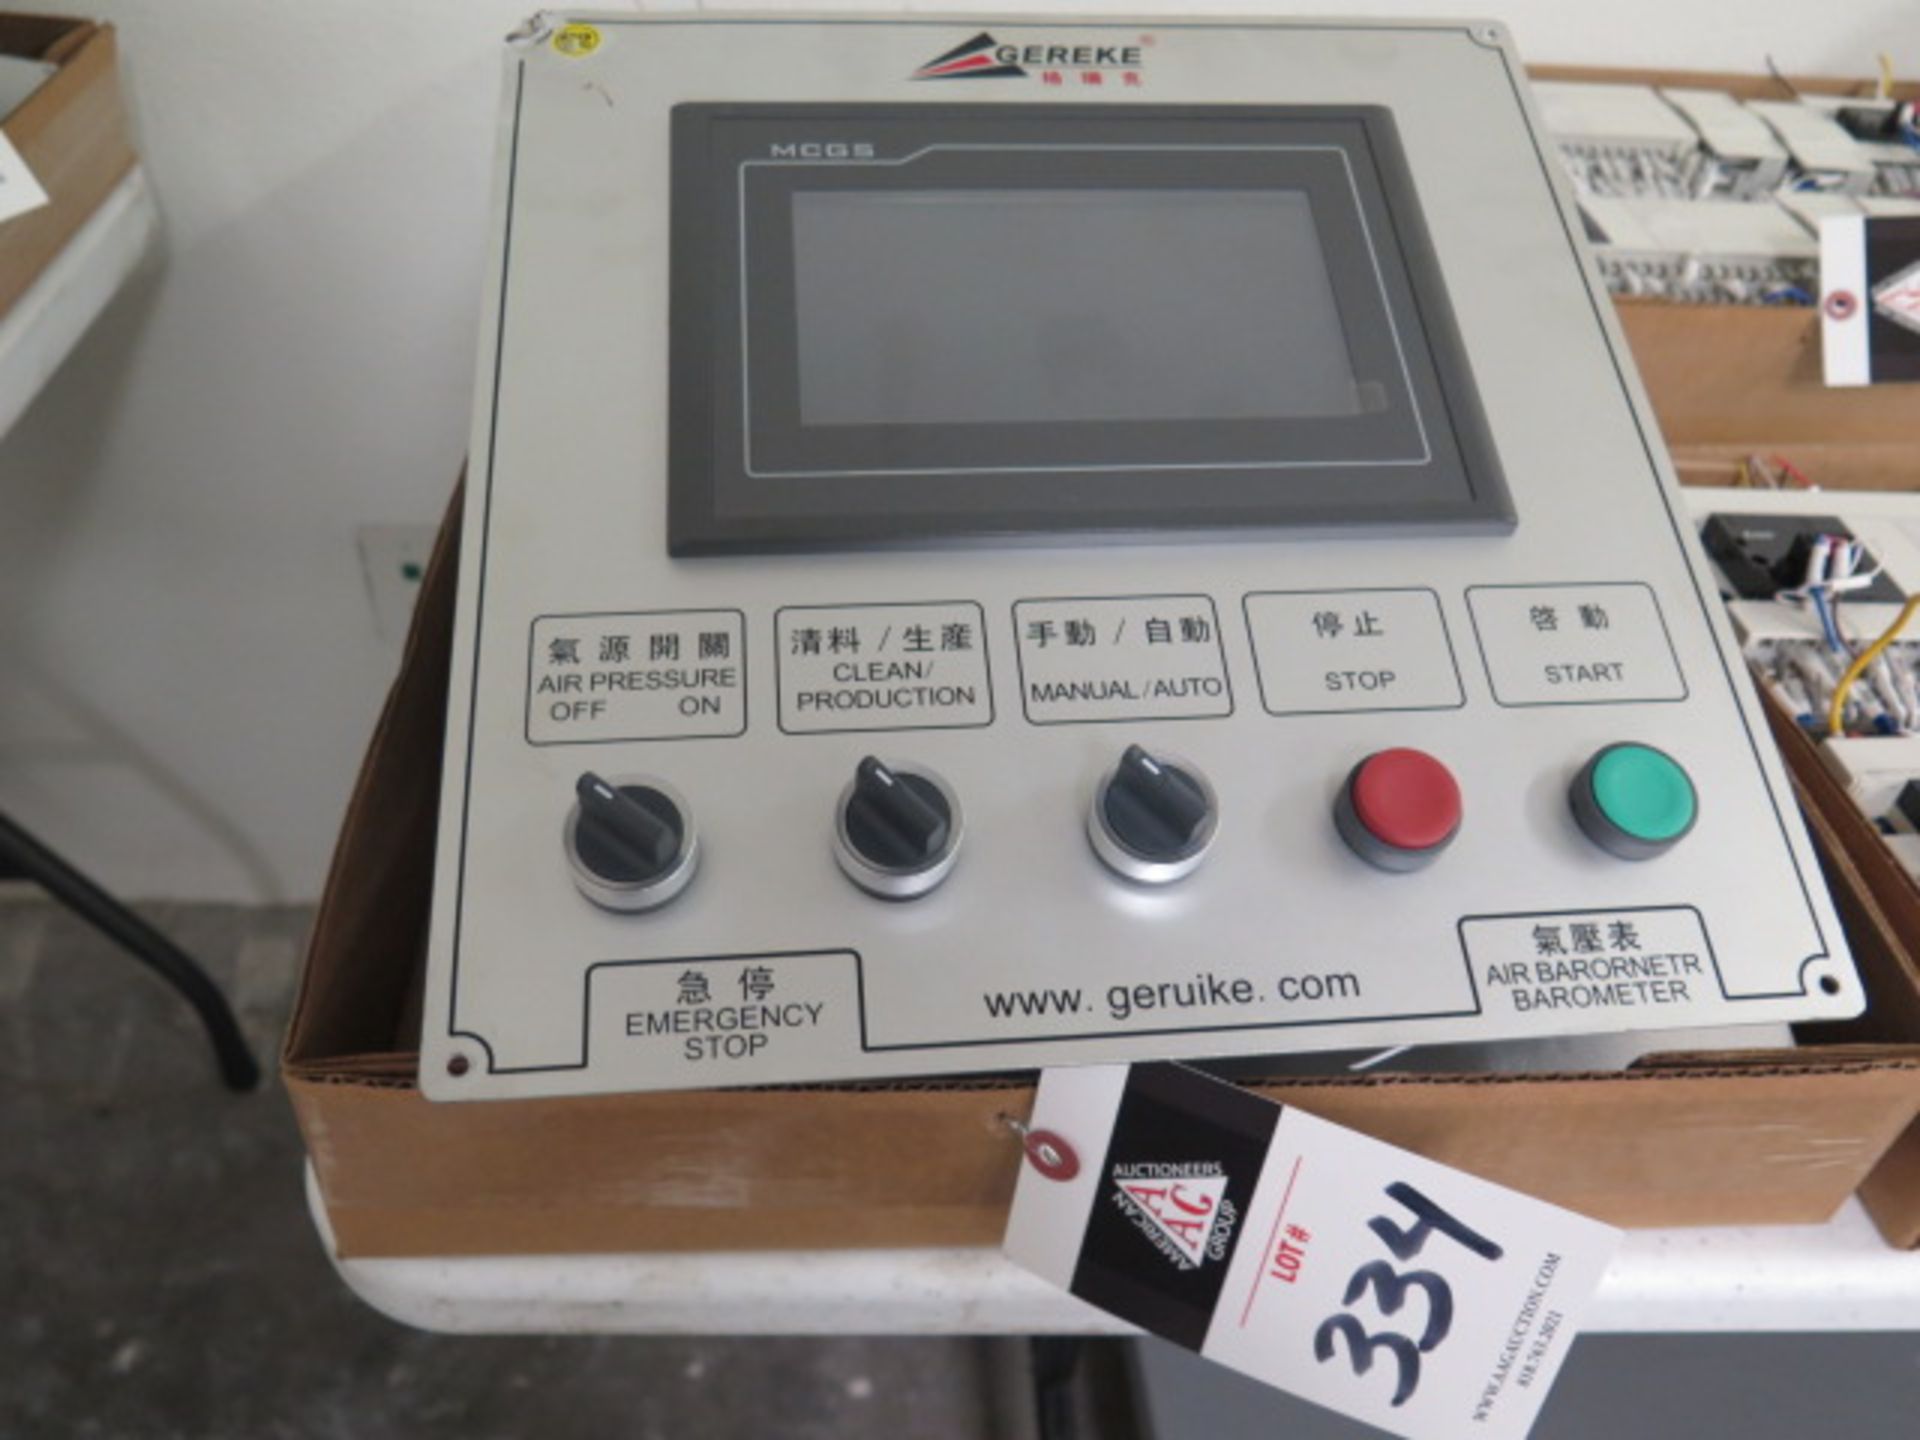 MCGS TPC mdl. TPC7062TD PLC Controllers (3) (SOLD AS-IS - NO WARRANTY)